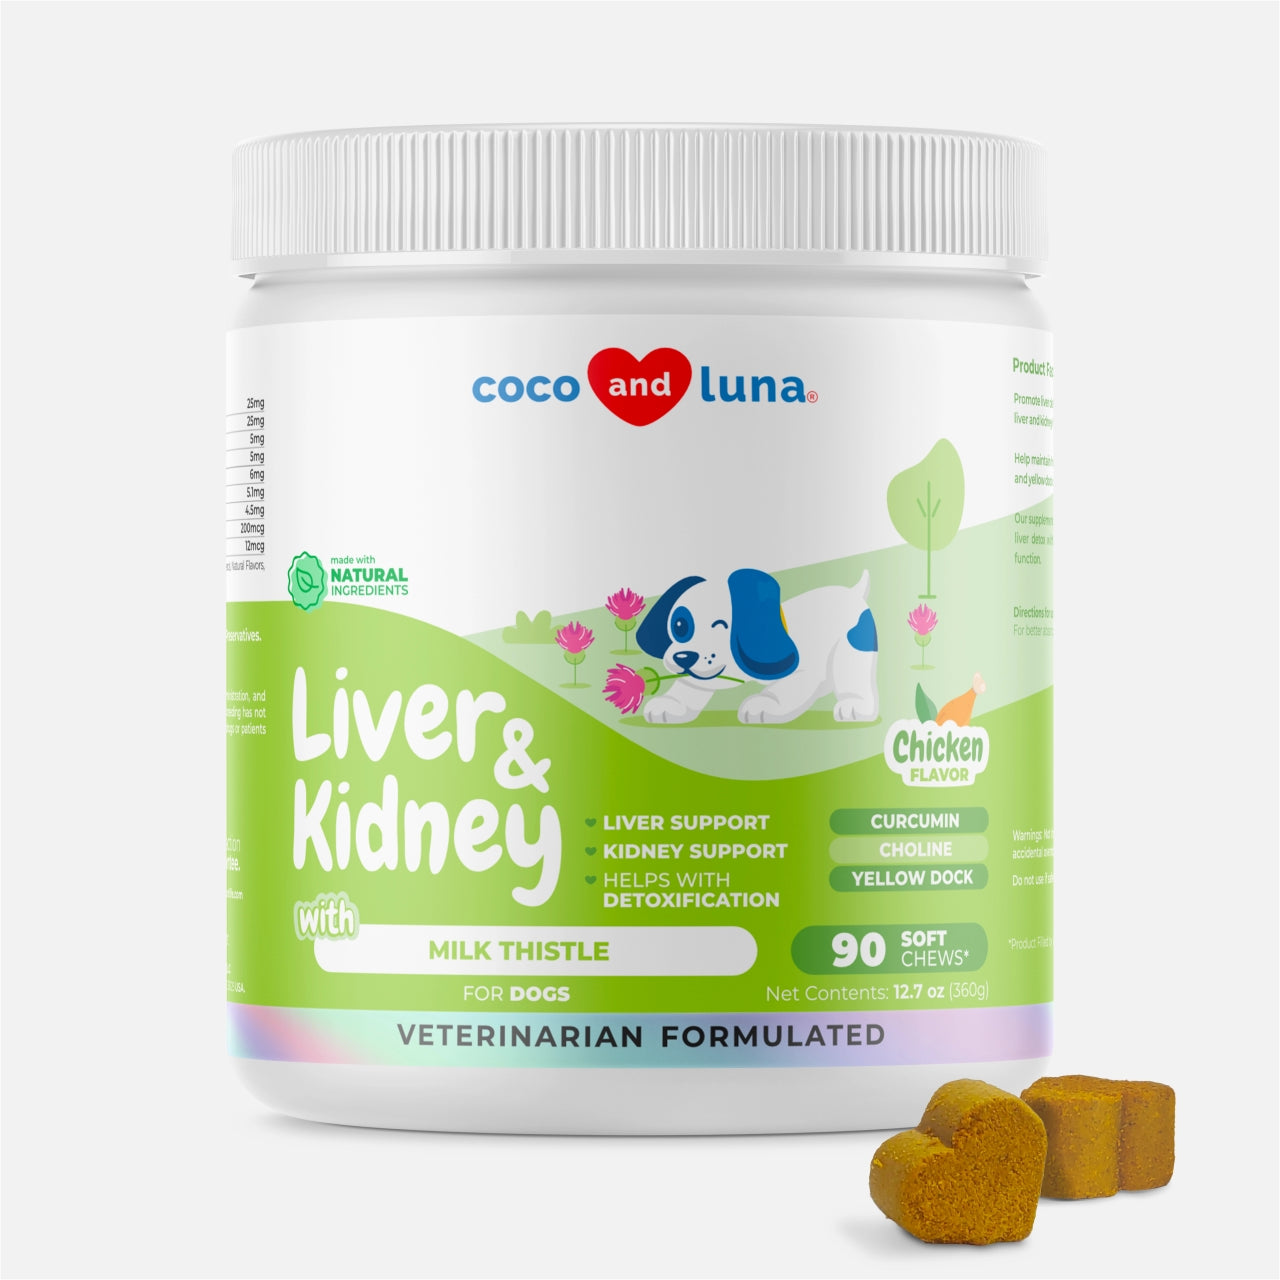 Liver and Kidney for Dogs - 90 Soft Chews - Coco and Luna